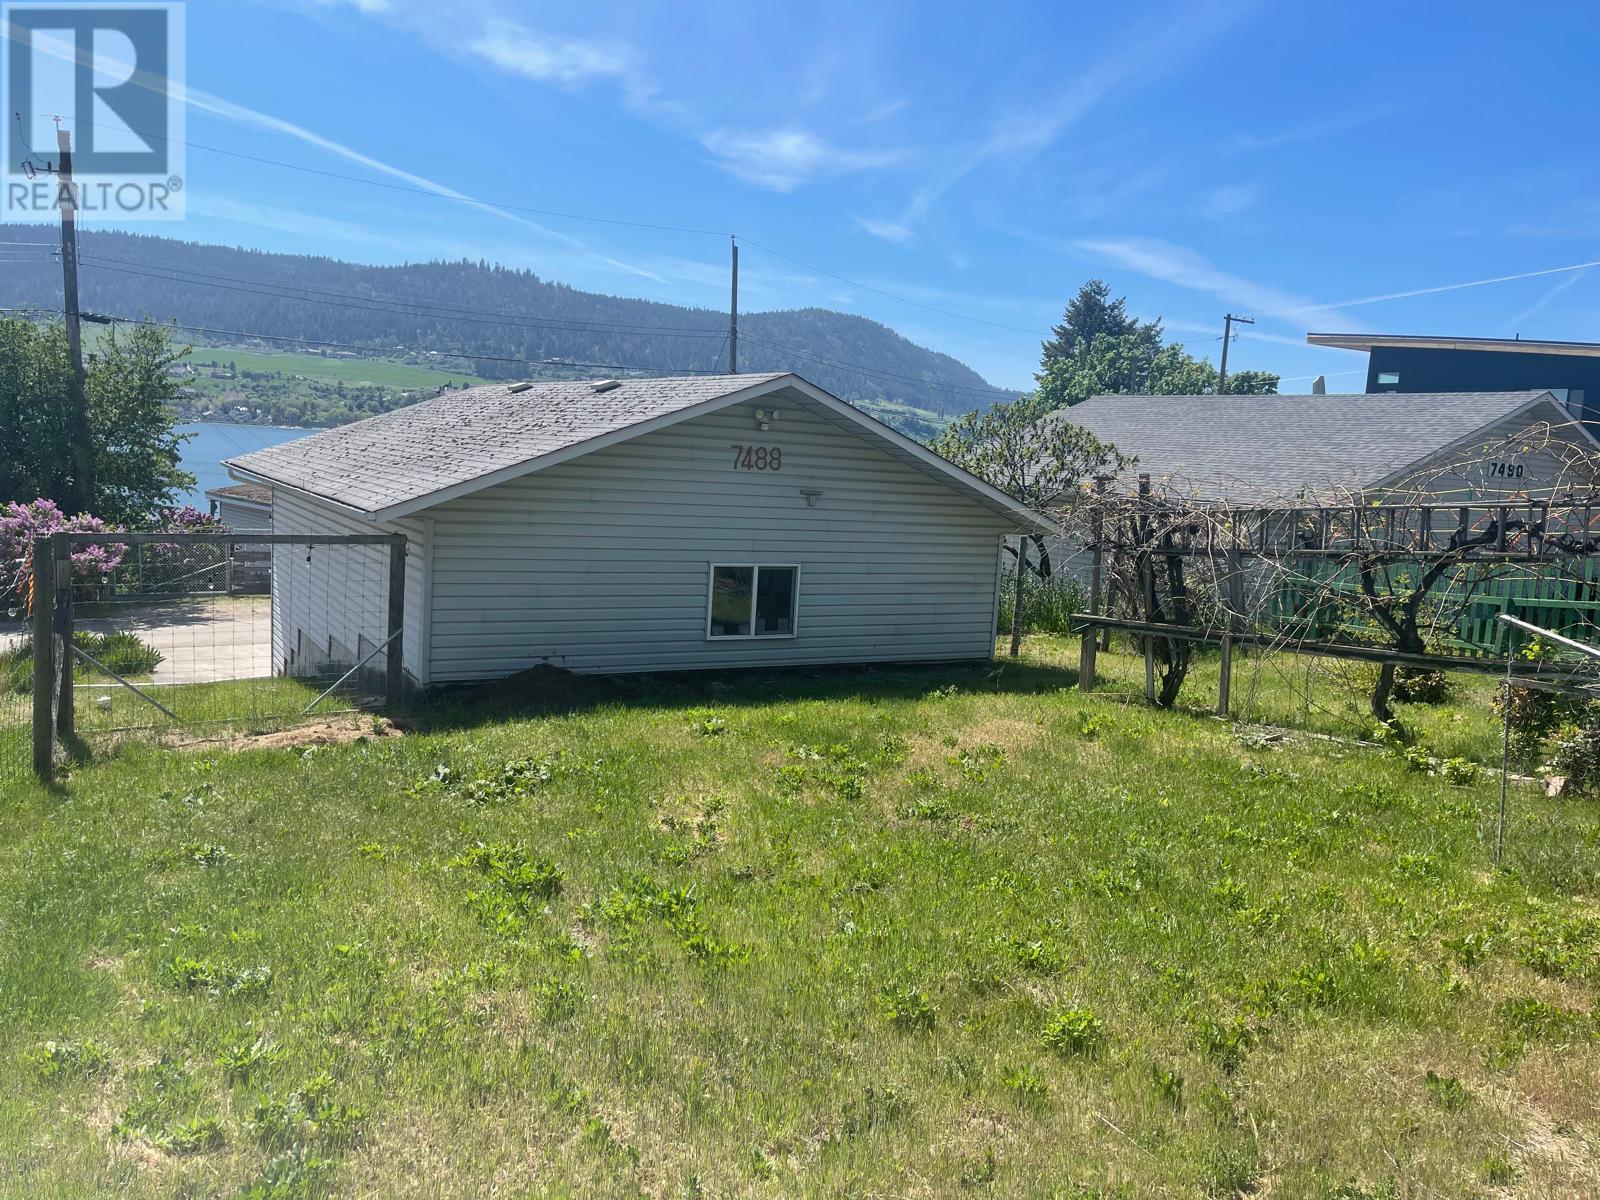  7488 Old Stamp Mill Road, Vernon